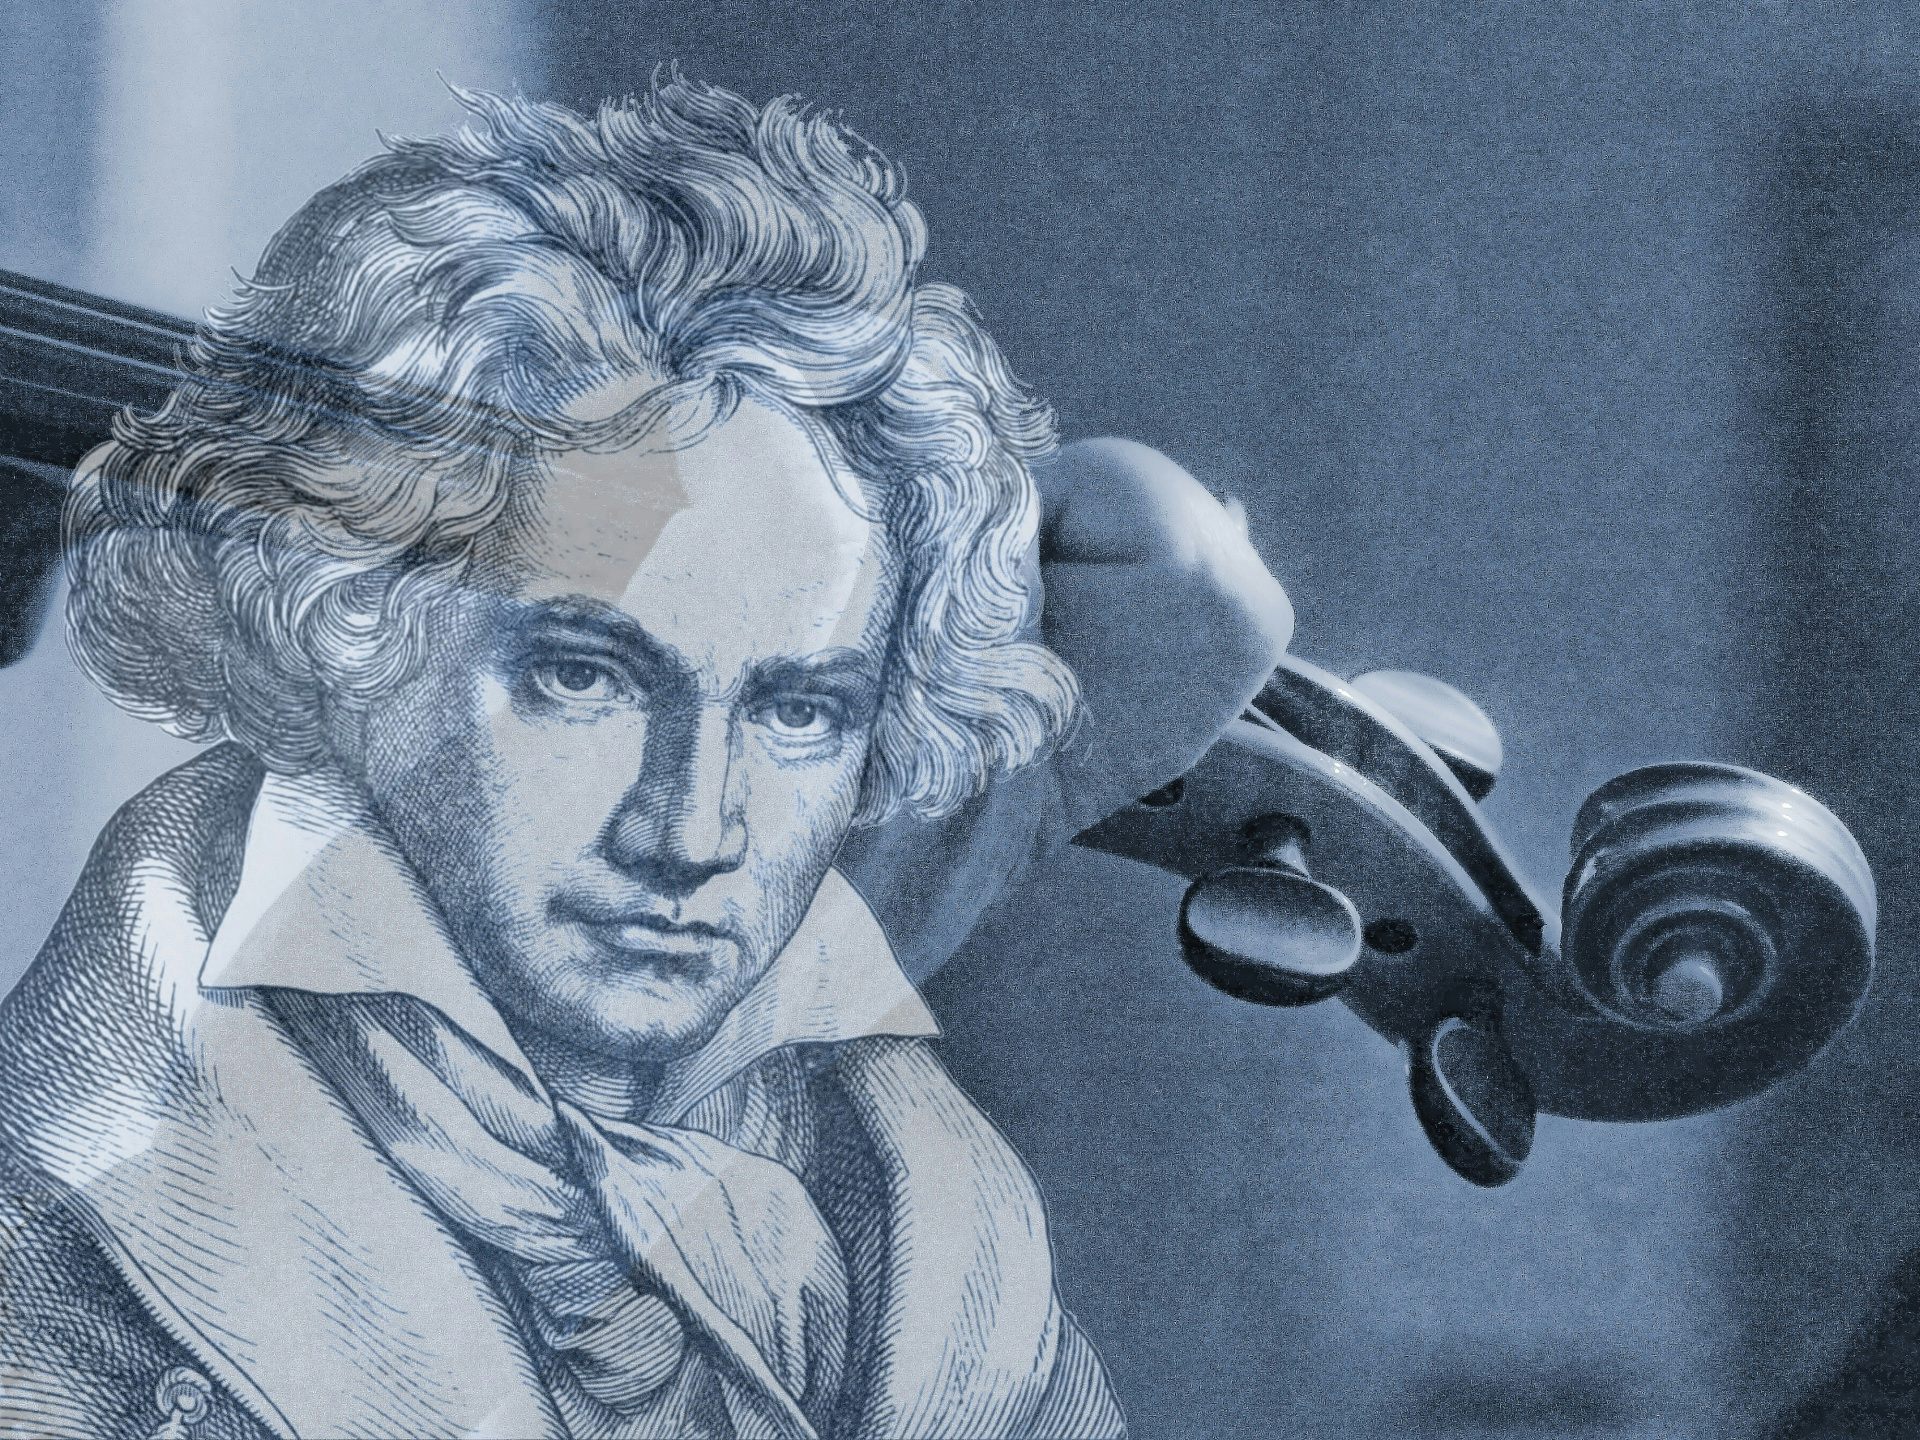 How a Team of Musicologists and Computer Scientists Completed Beethoven’s Unfinished 10th Symphony